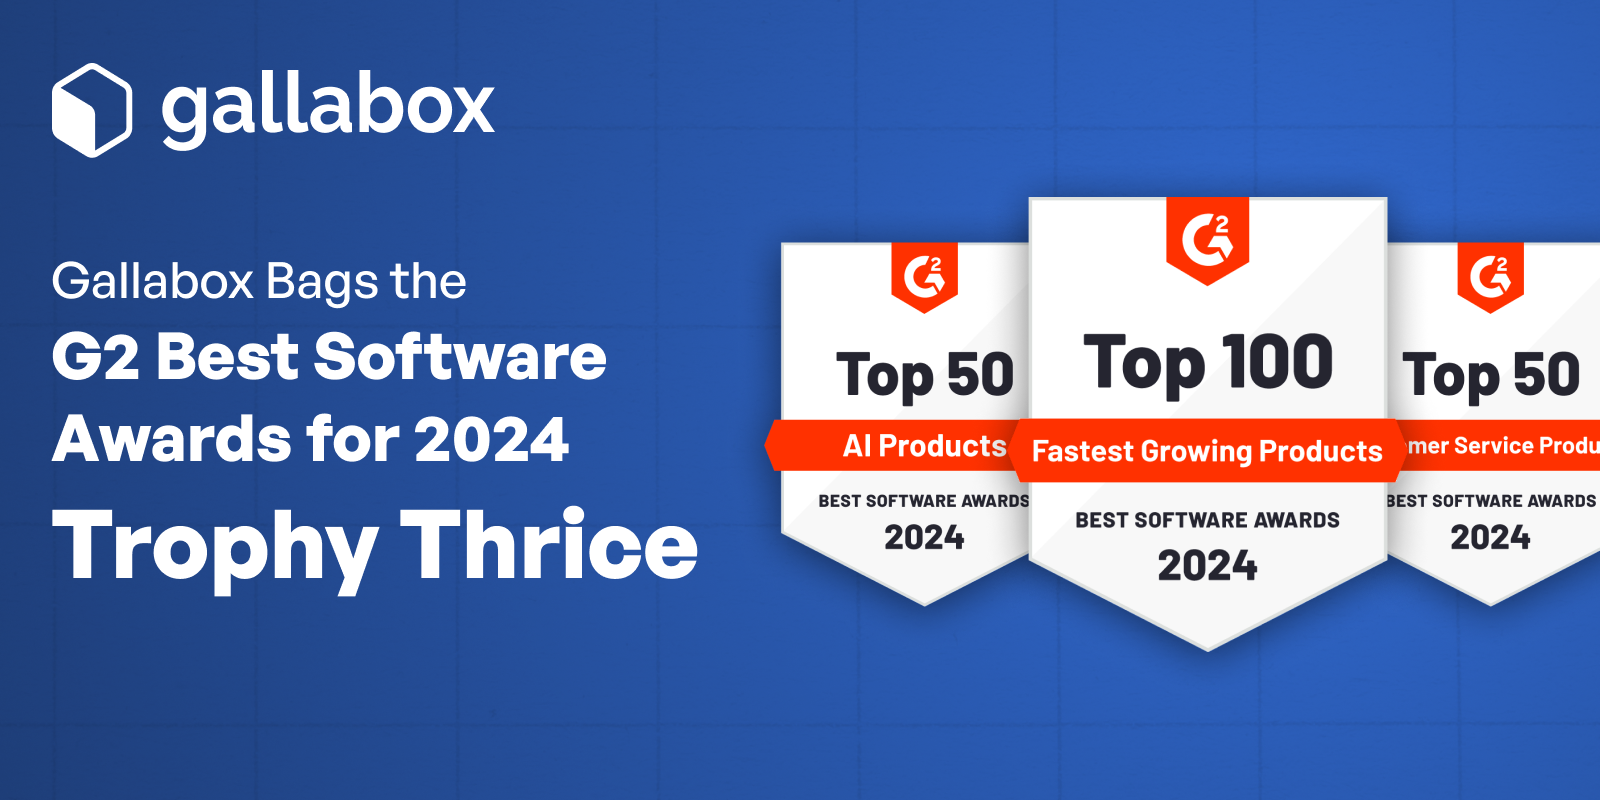 Gallabox Bags the G2 Best Software Awards for 2024 Trophy Thrice